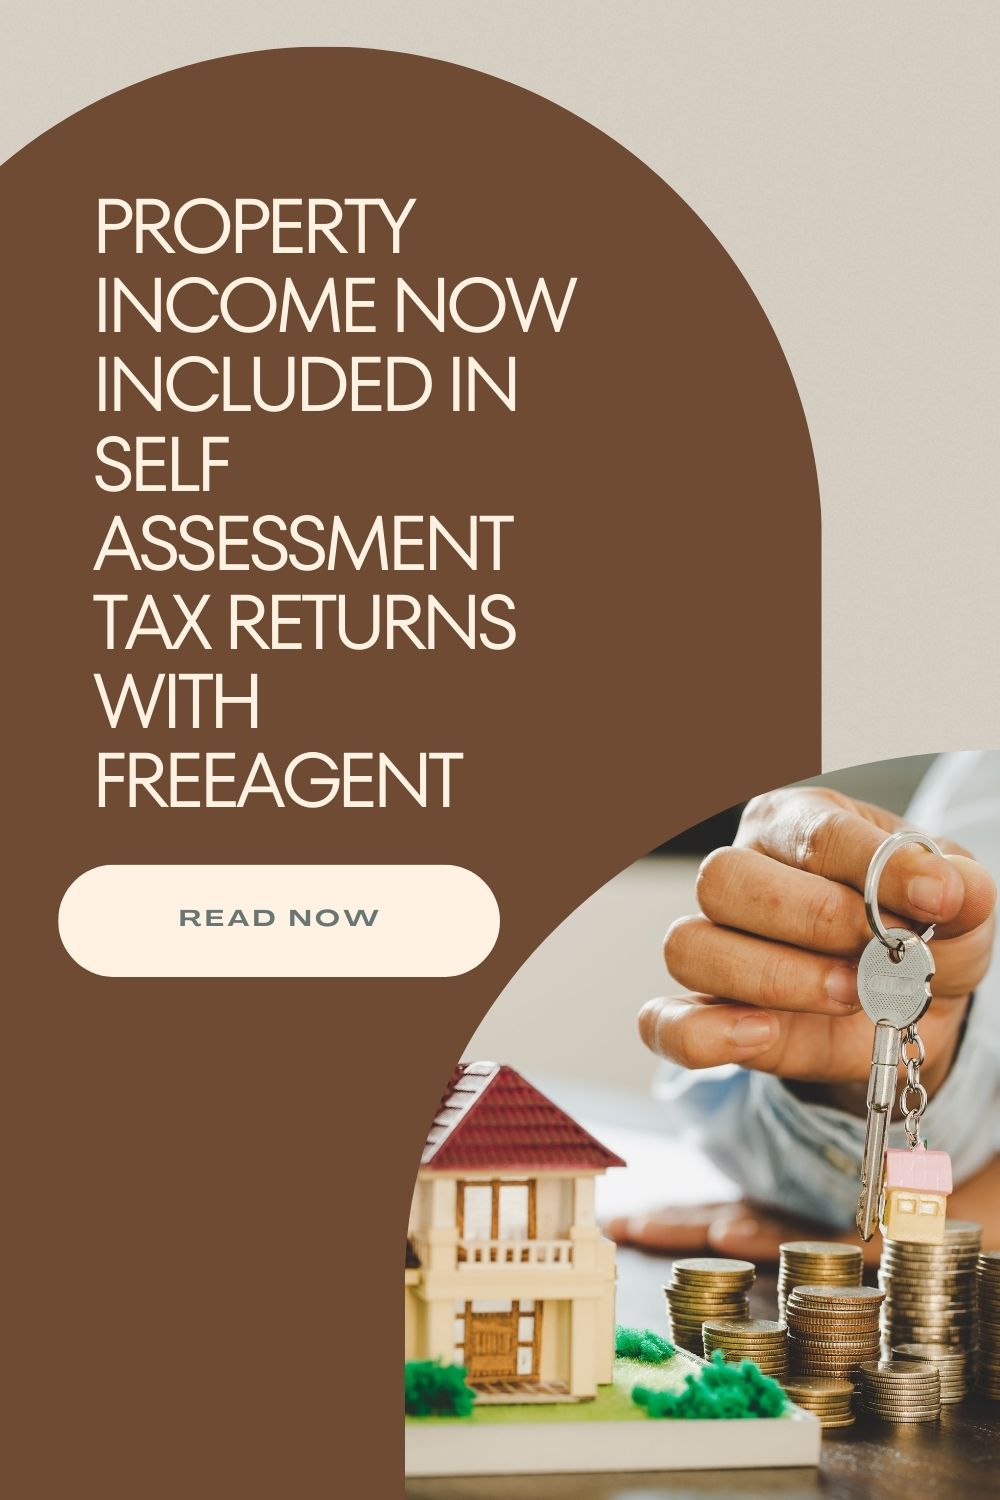 FreeAgent now integrates property income into Self Assessment filings for sole traders and limited companies. 